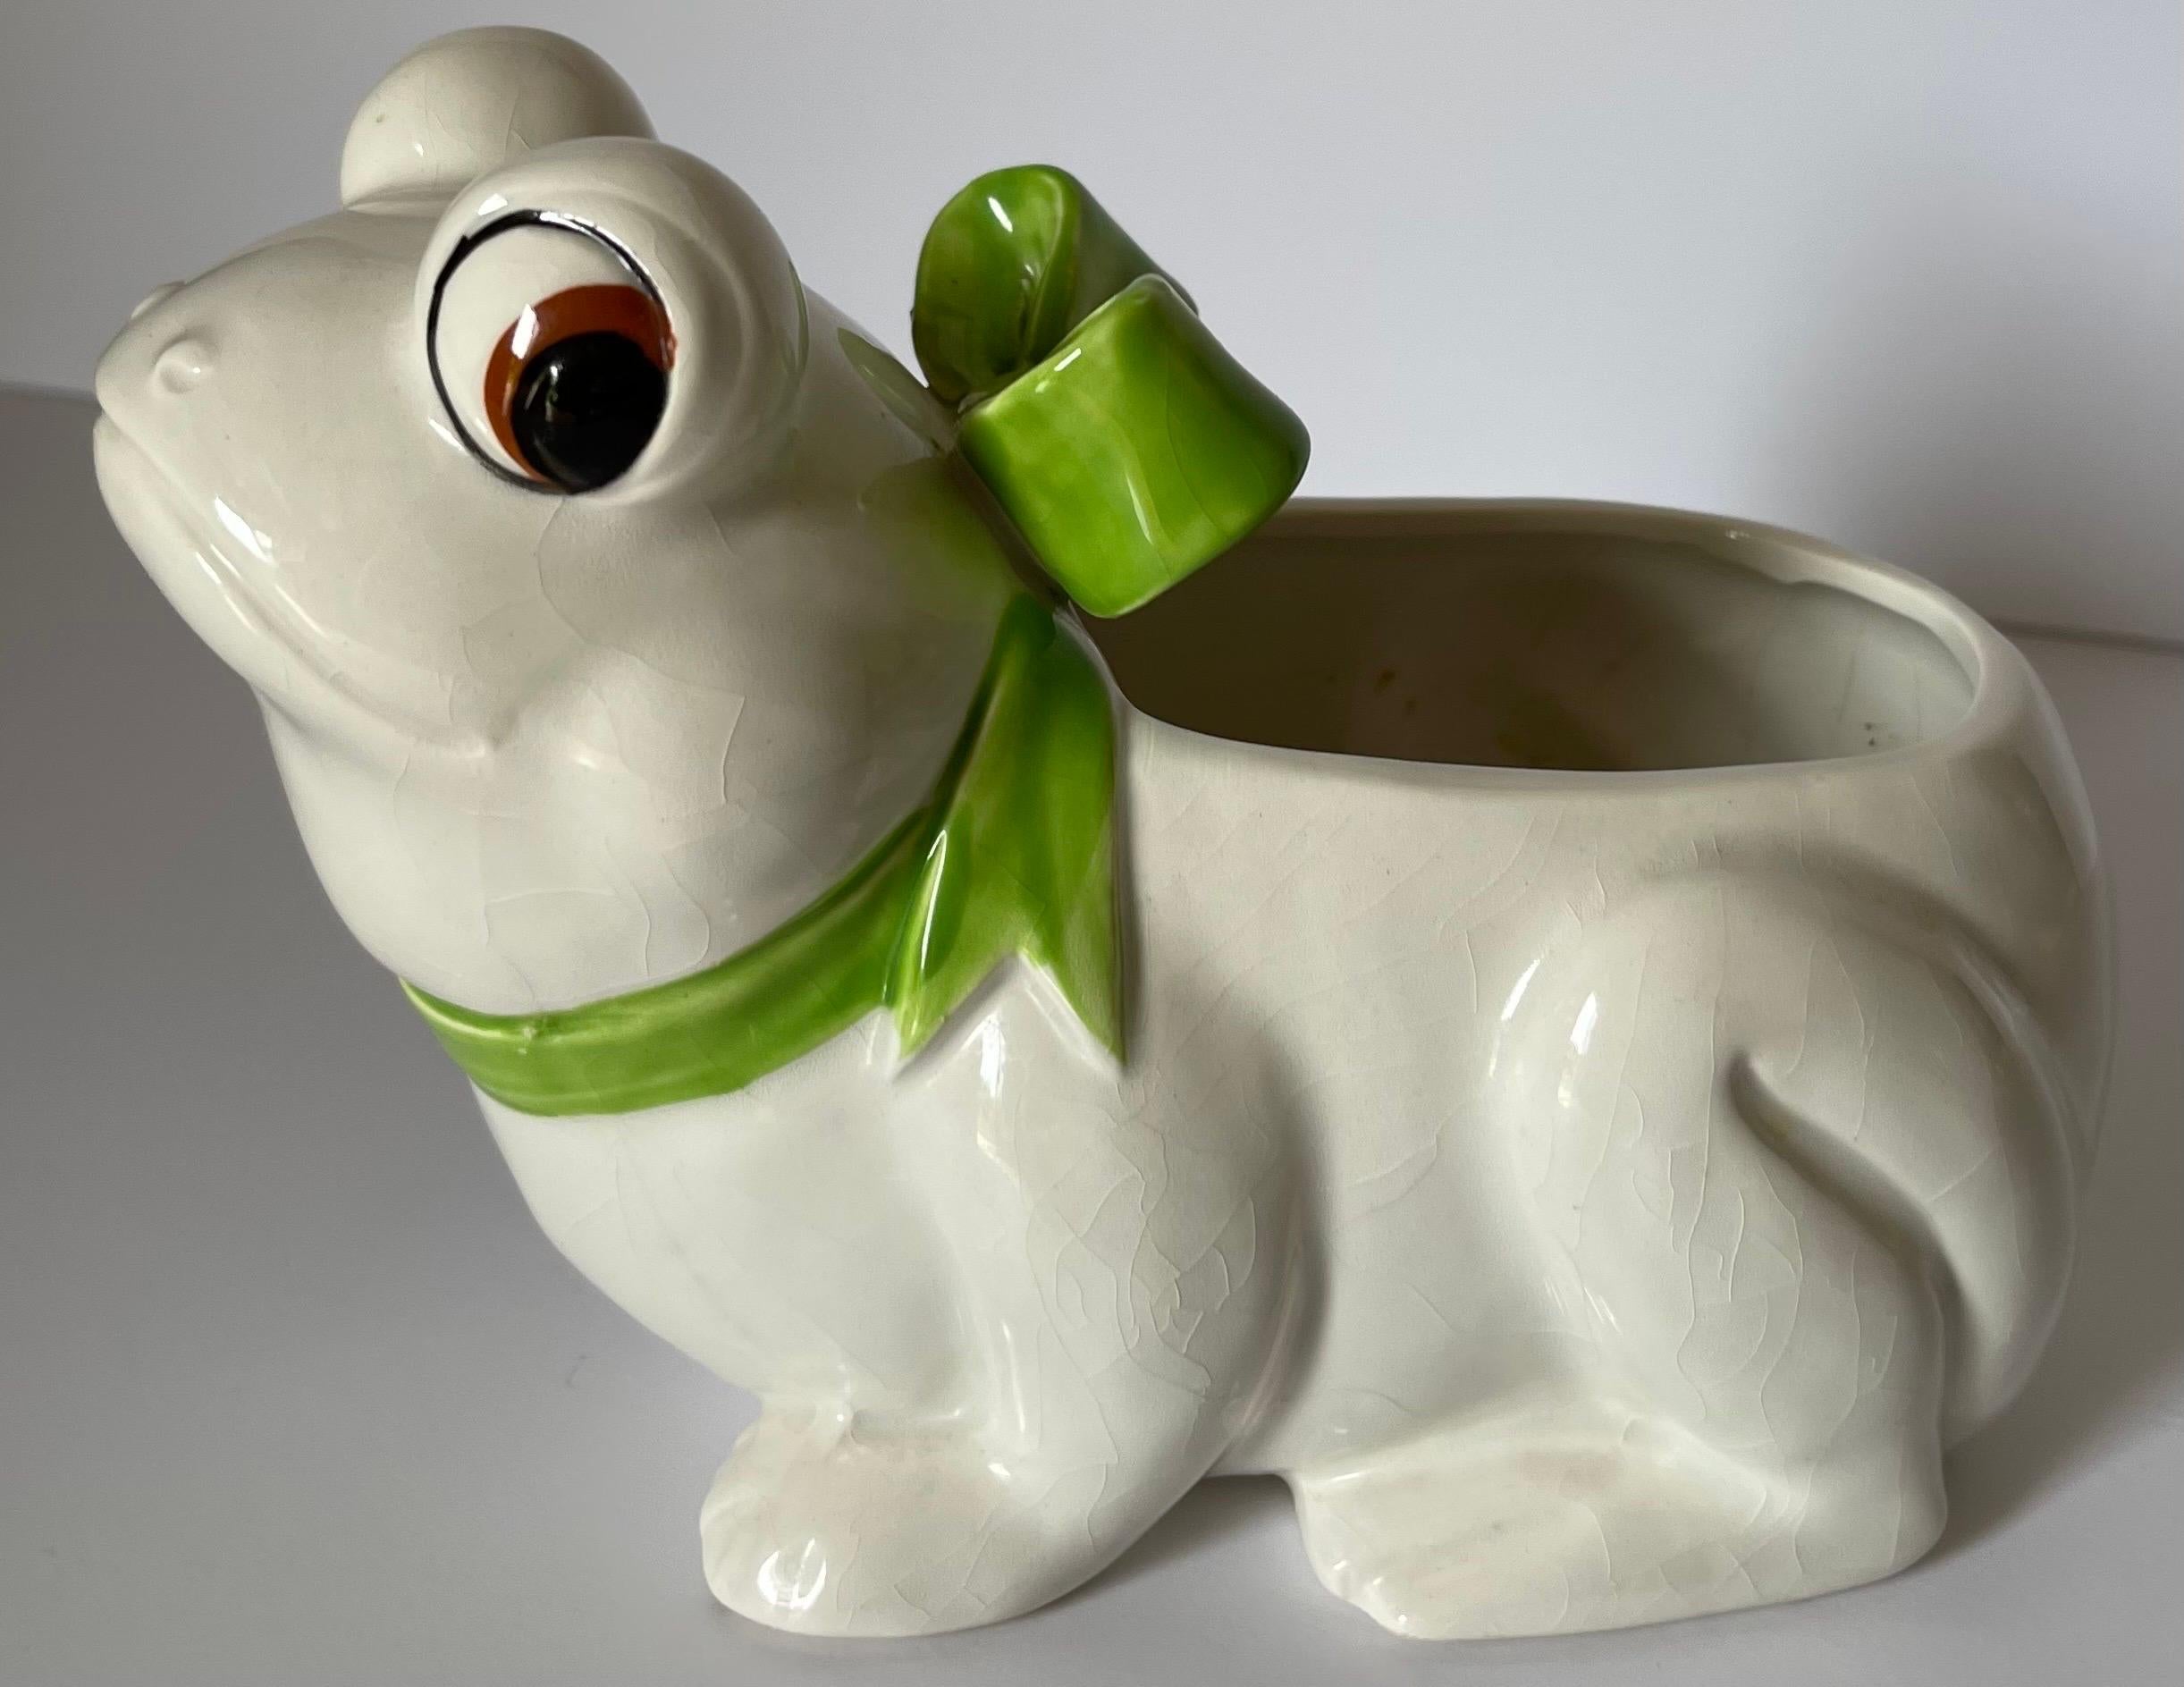 Whimsical 1970s ceramic frog ceramic planter. Cream colored glazed frog with lime green ceramic bow. No makers mark or signature.